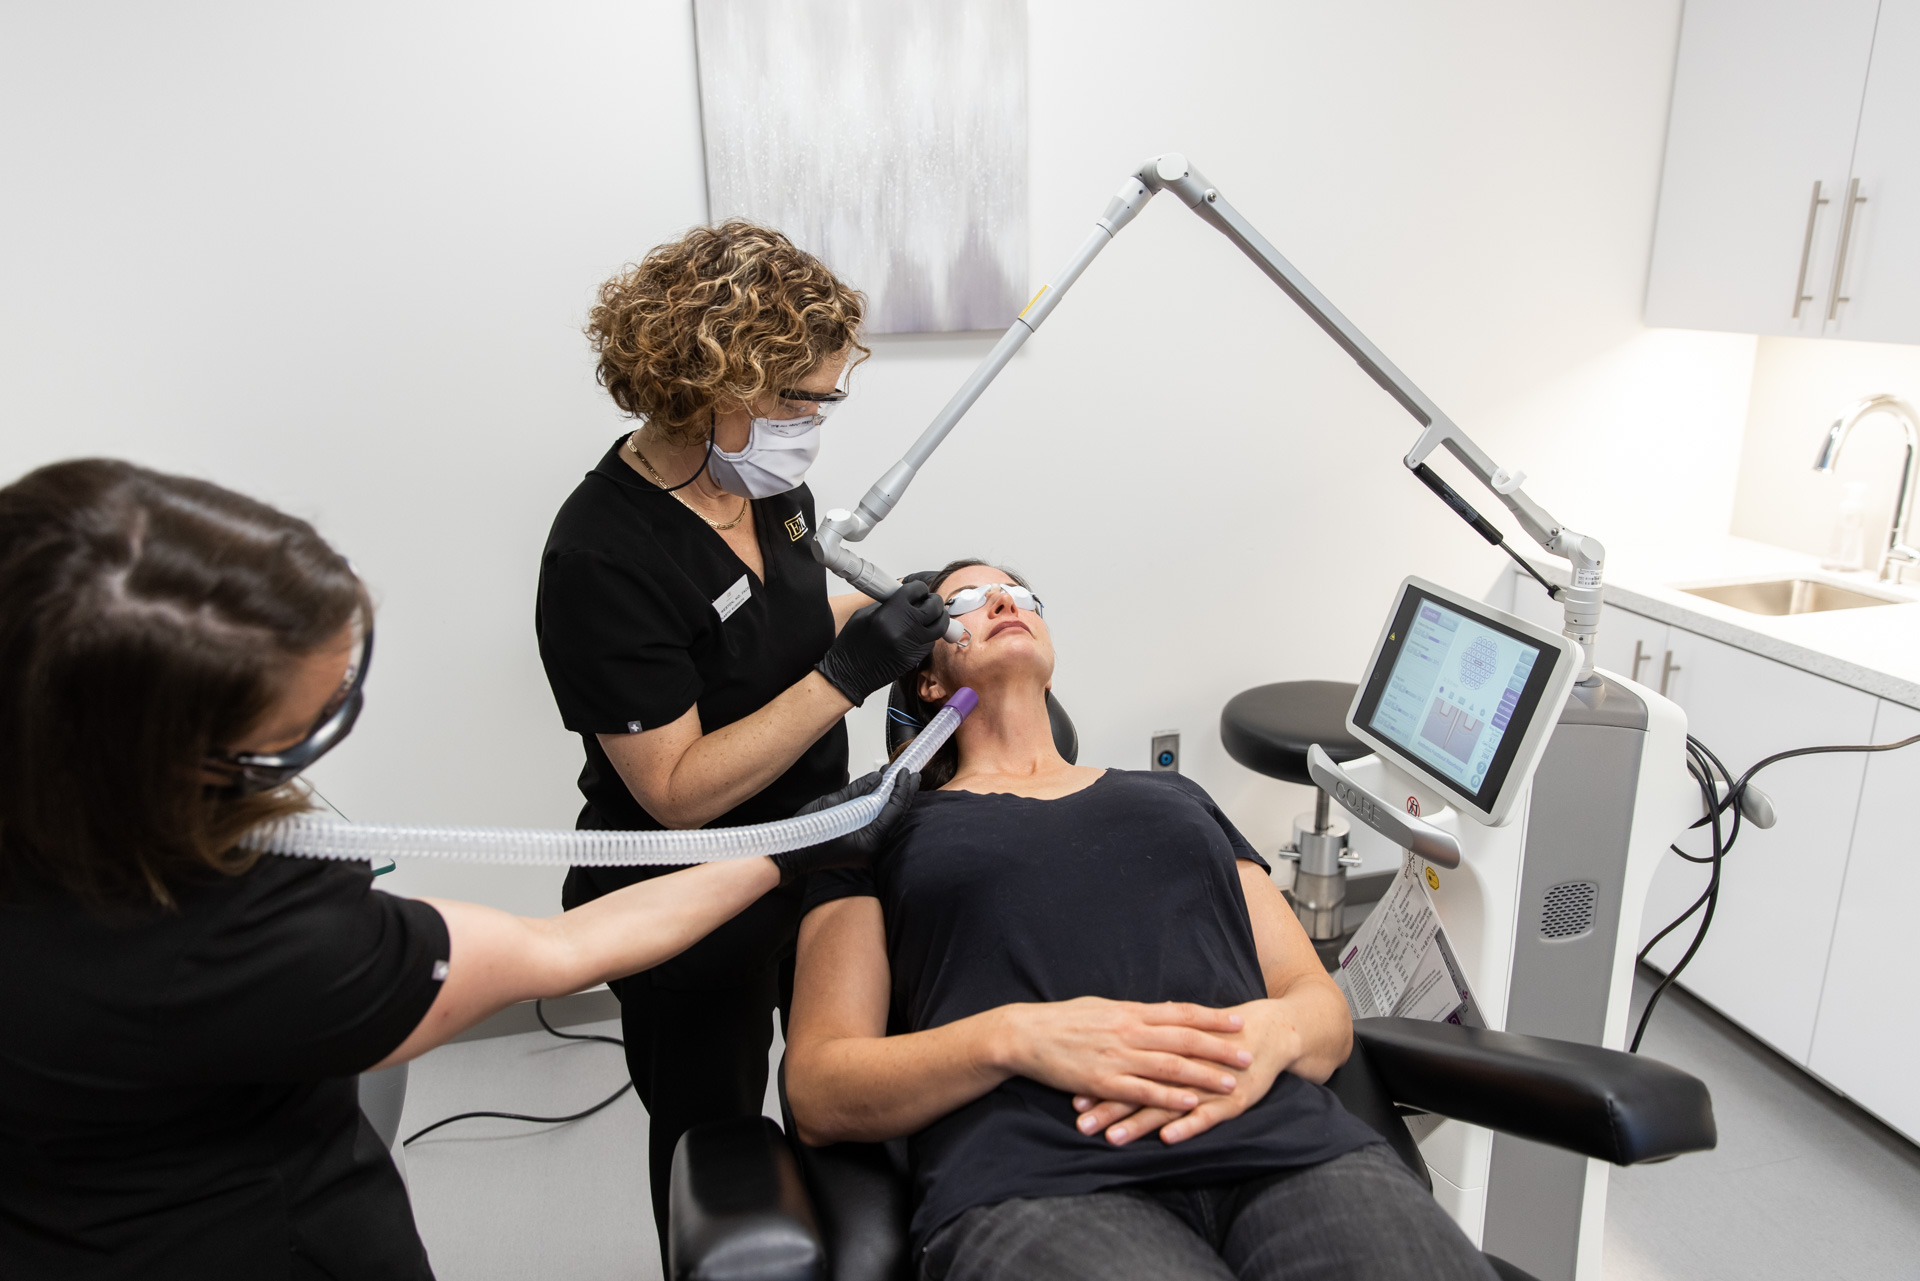 CO2 Laser Resurfacing from Entre Nous Aesthetics in the Bay Area